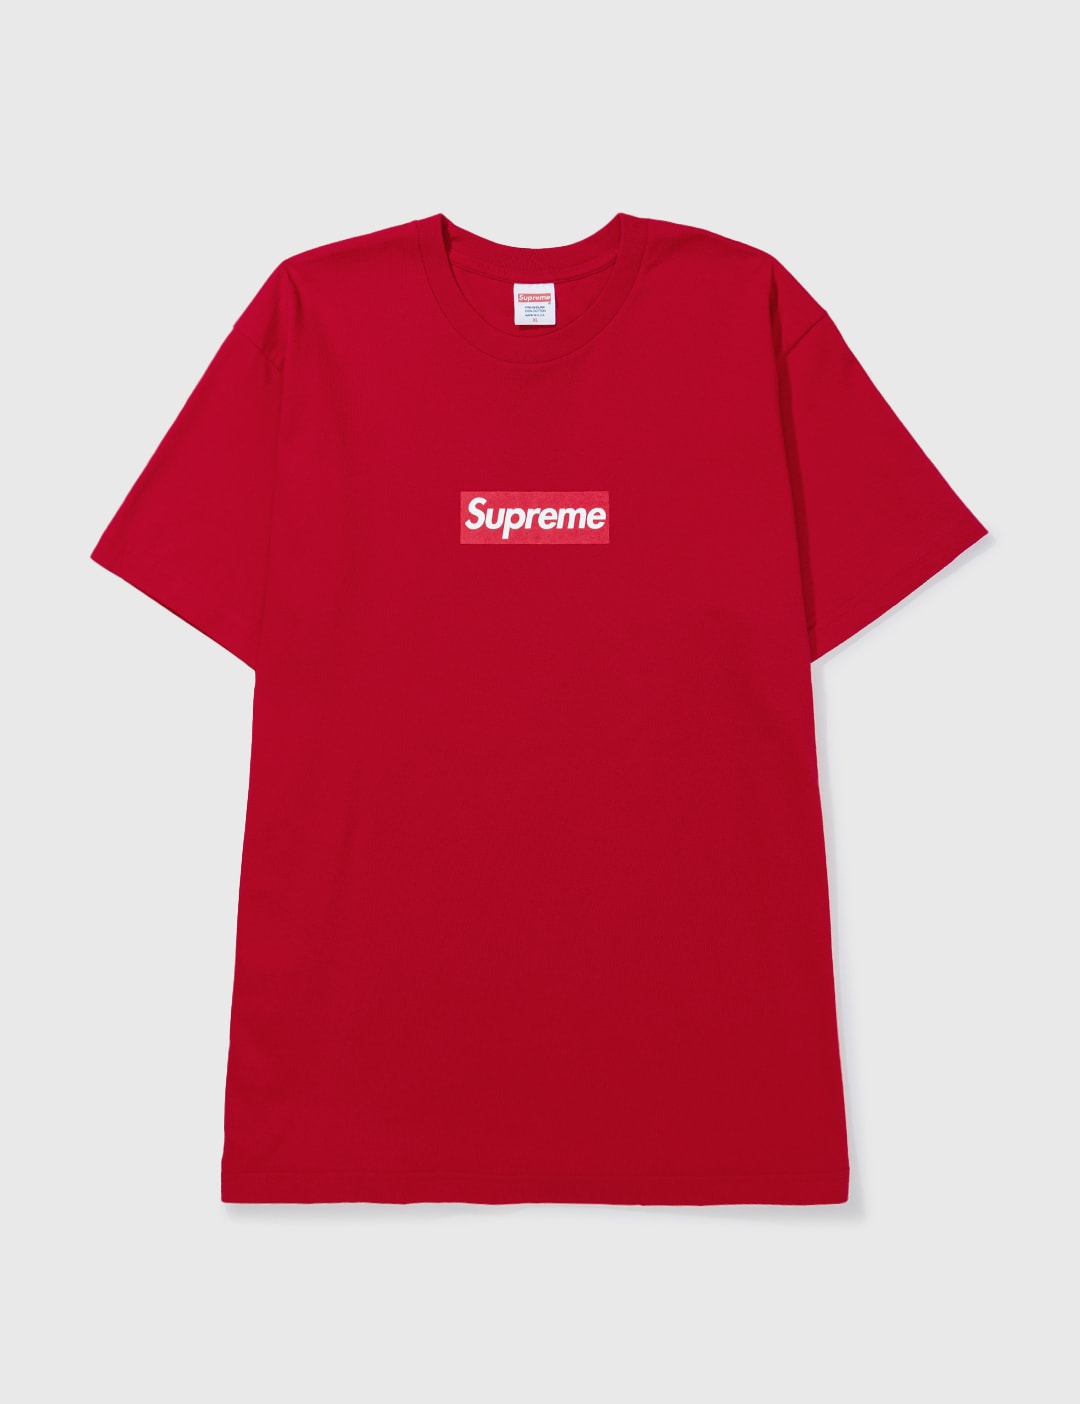 Gasping Array hunt Supreme - 20TH ANNIVERSARY BOX LOGO T-shirt | HBX - Globally Curated  Fashion and Lifestyle by Hypebeast